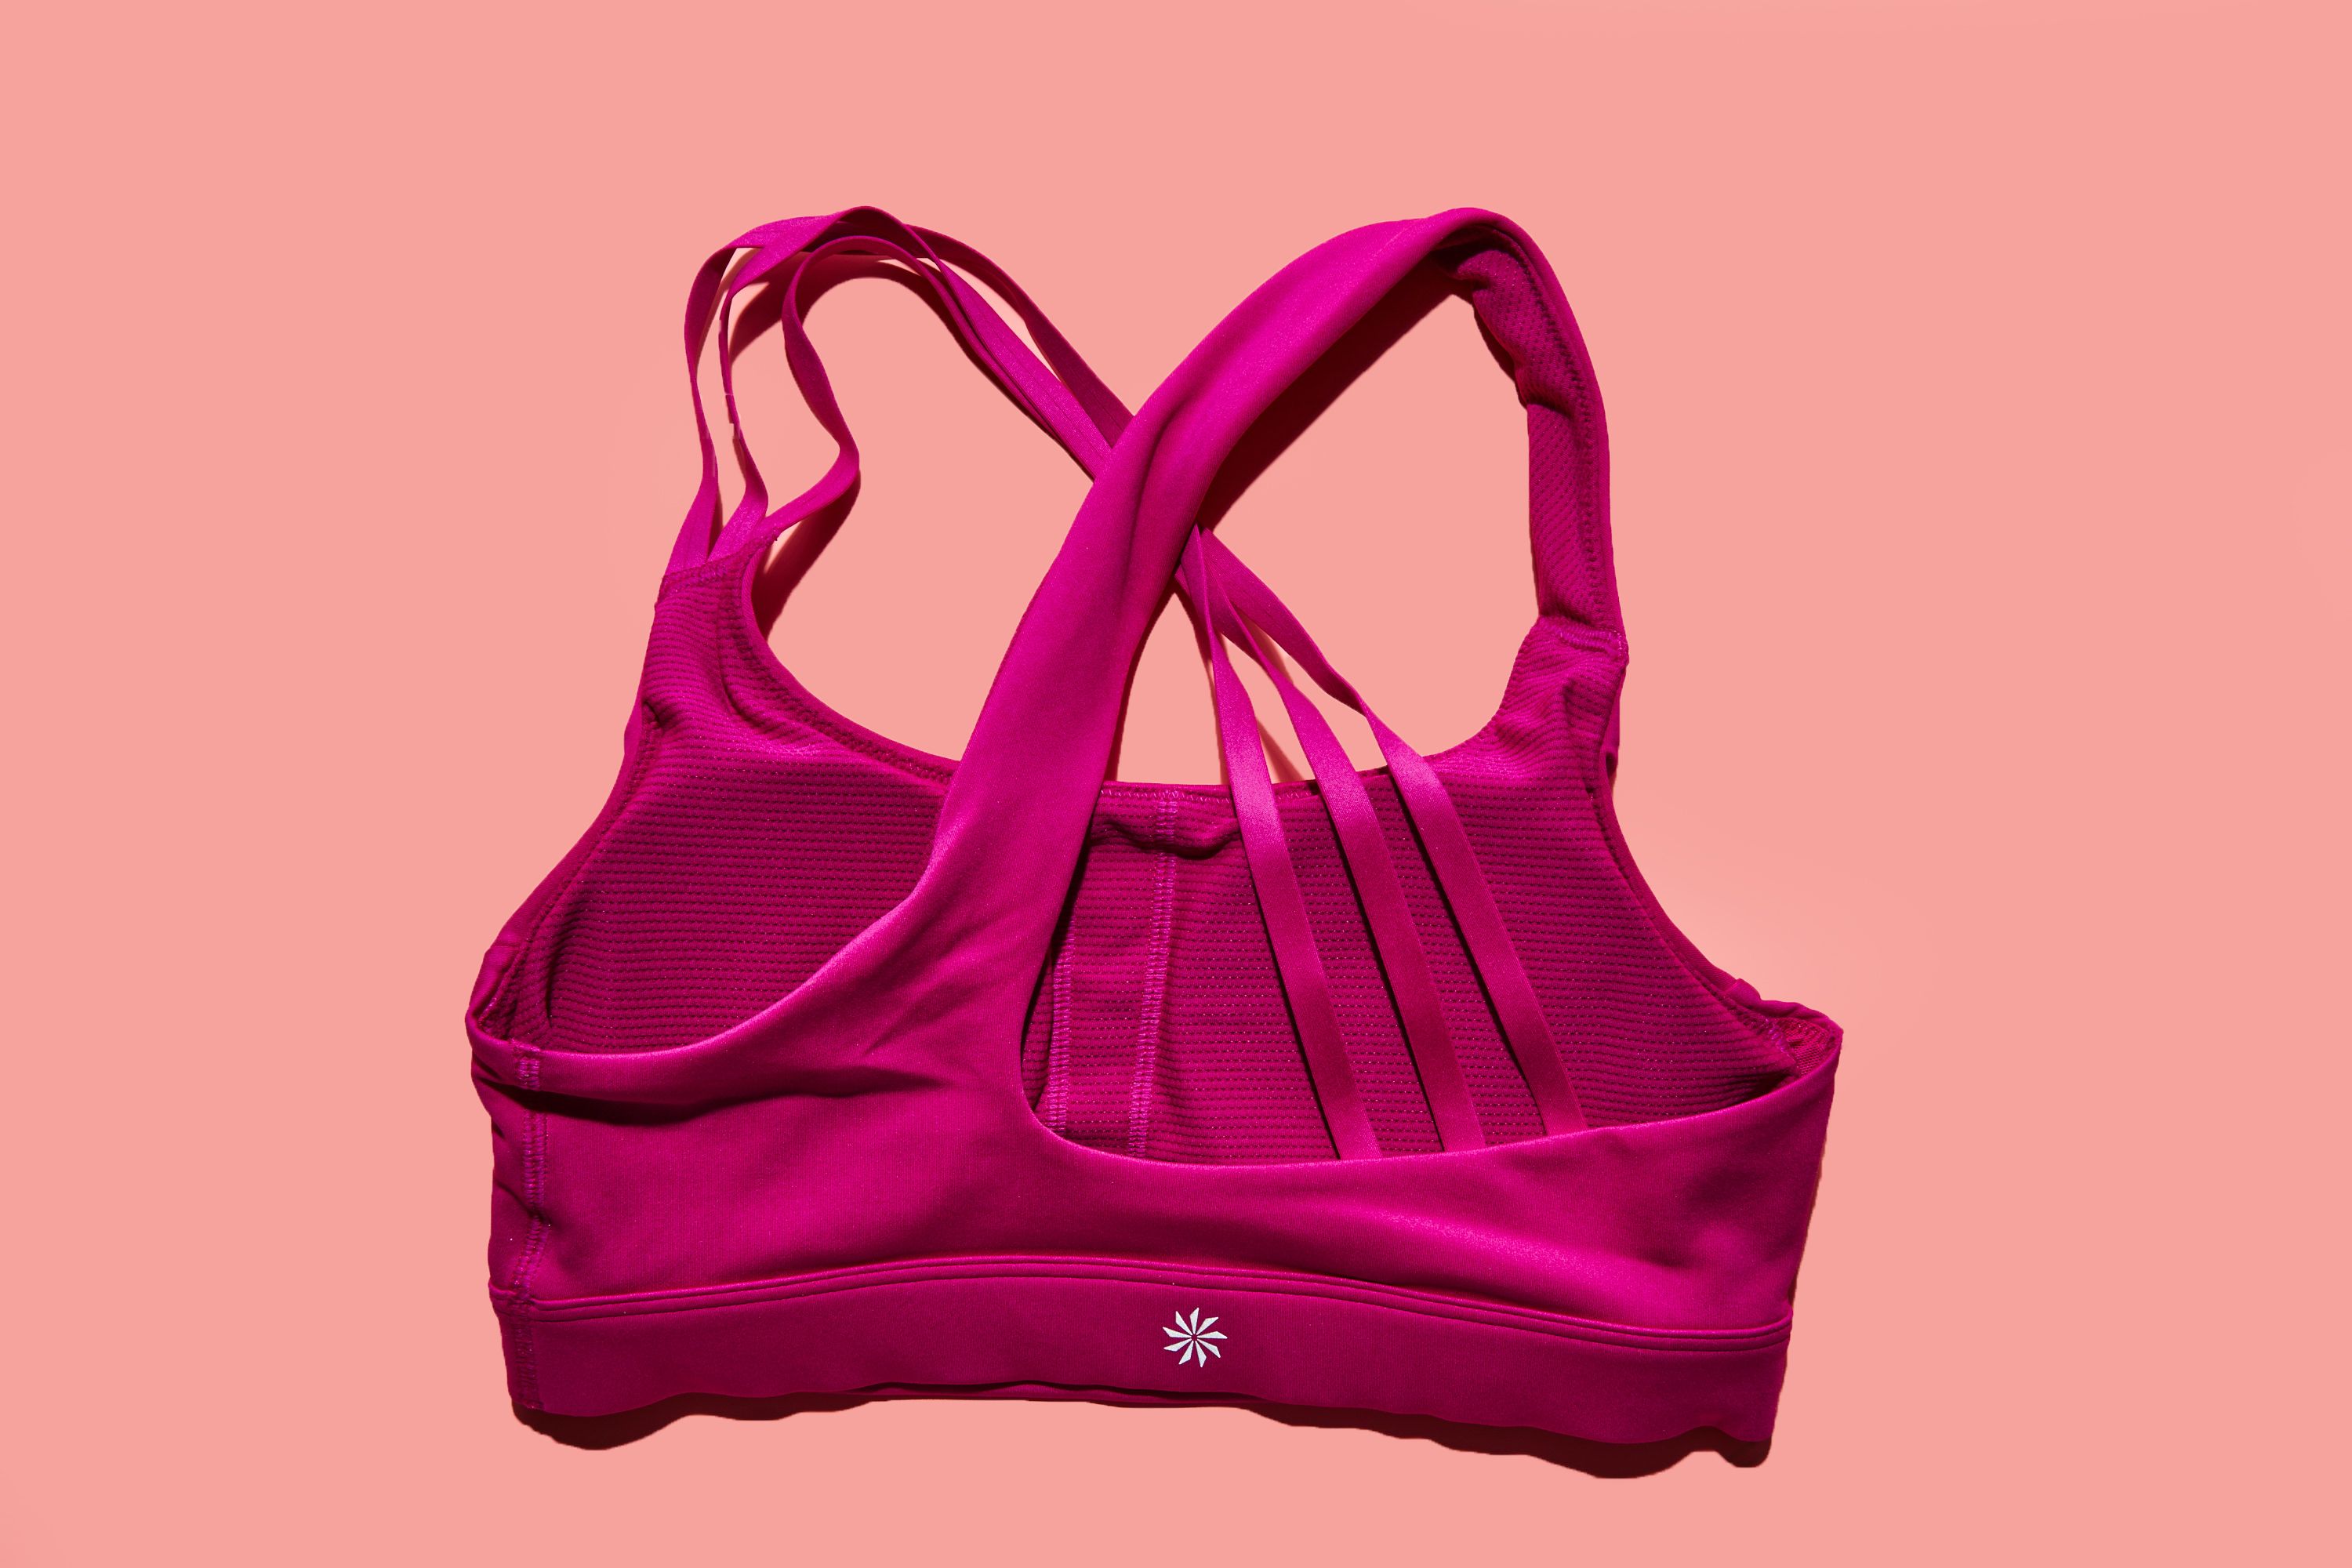 Athleta Hyper-Focused and Fully-Focused bras (3 items sold as a Bundle)